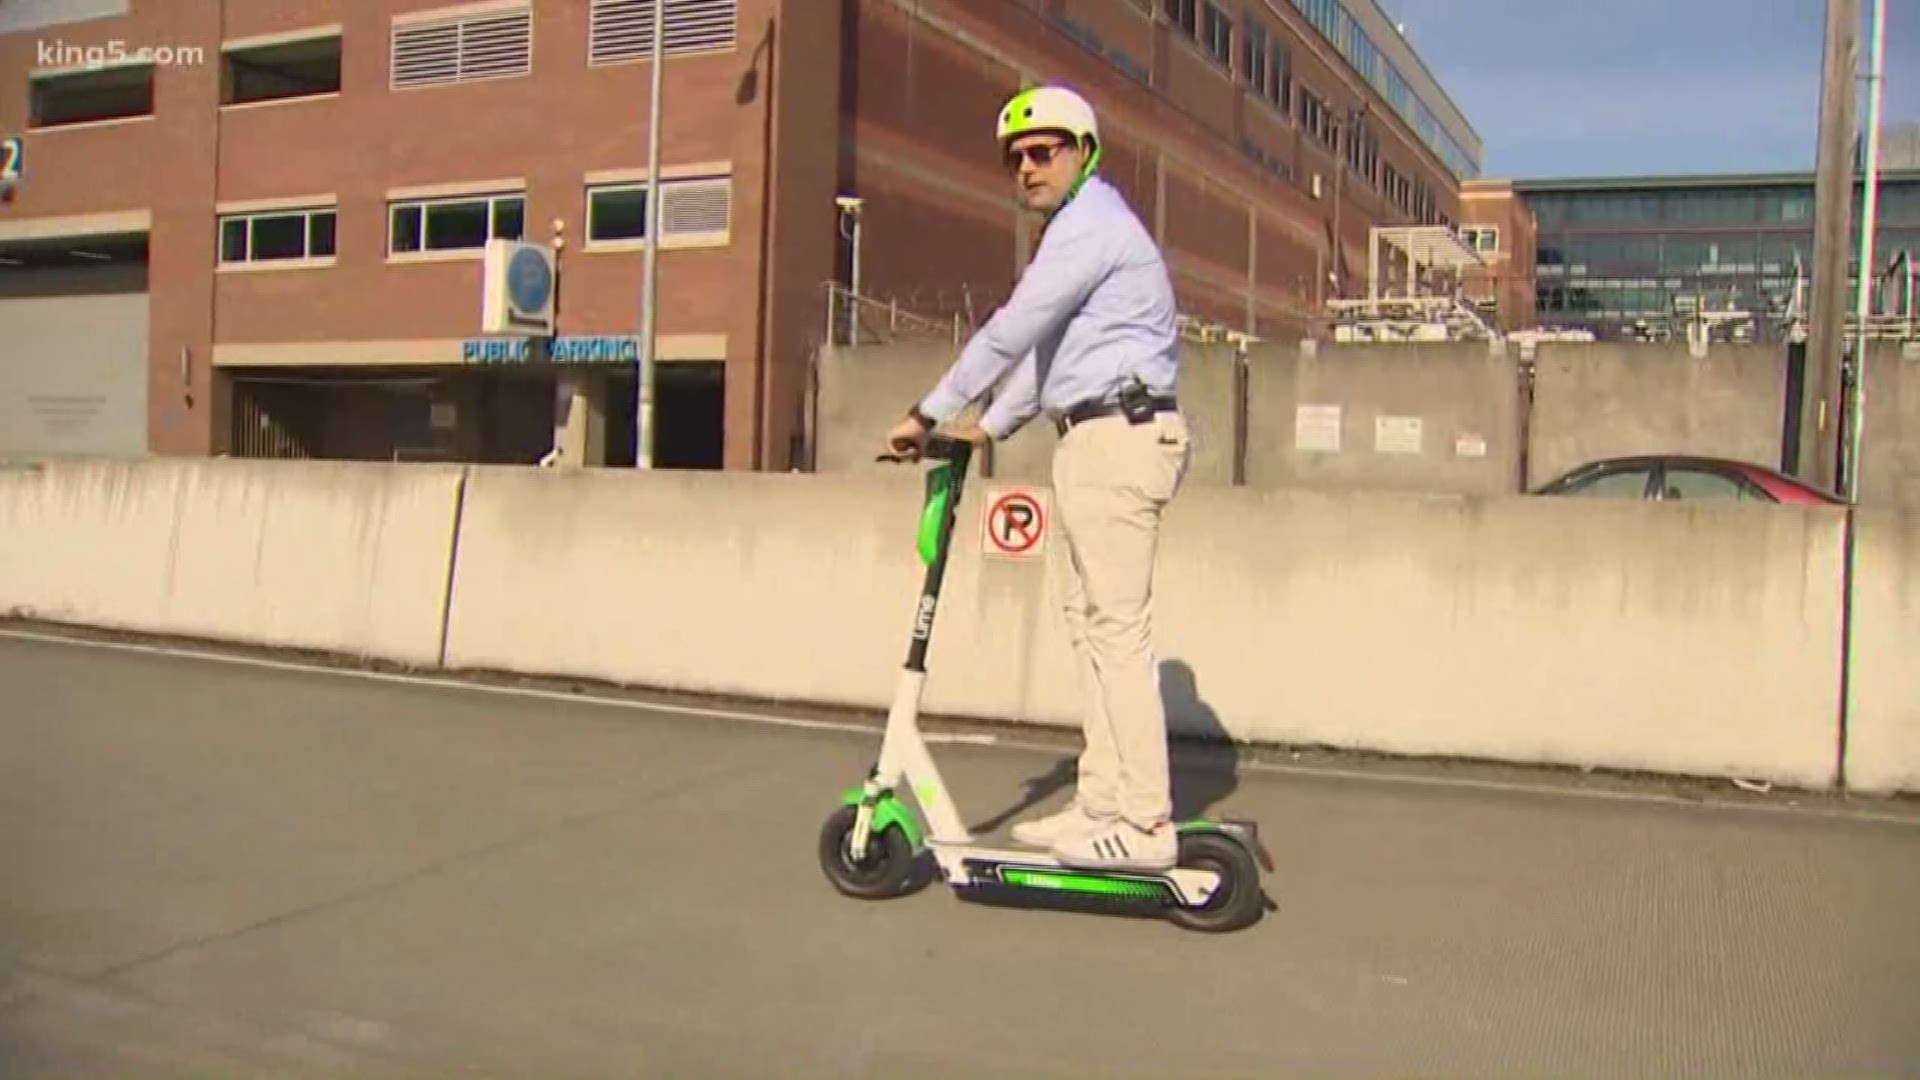 The City of Seattle has changed course and is now considering a scooter-sharing program. KING 5's Chris Daniels has the scoop on scooters.